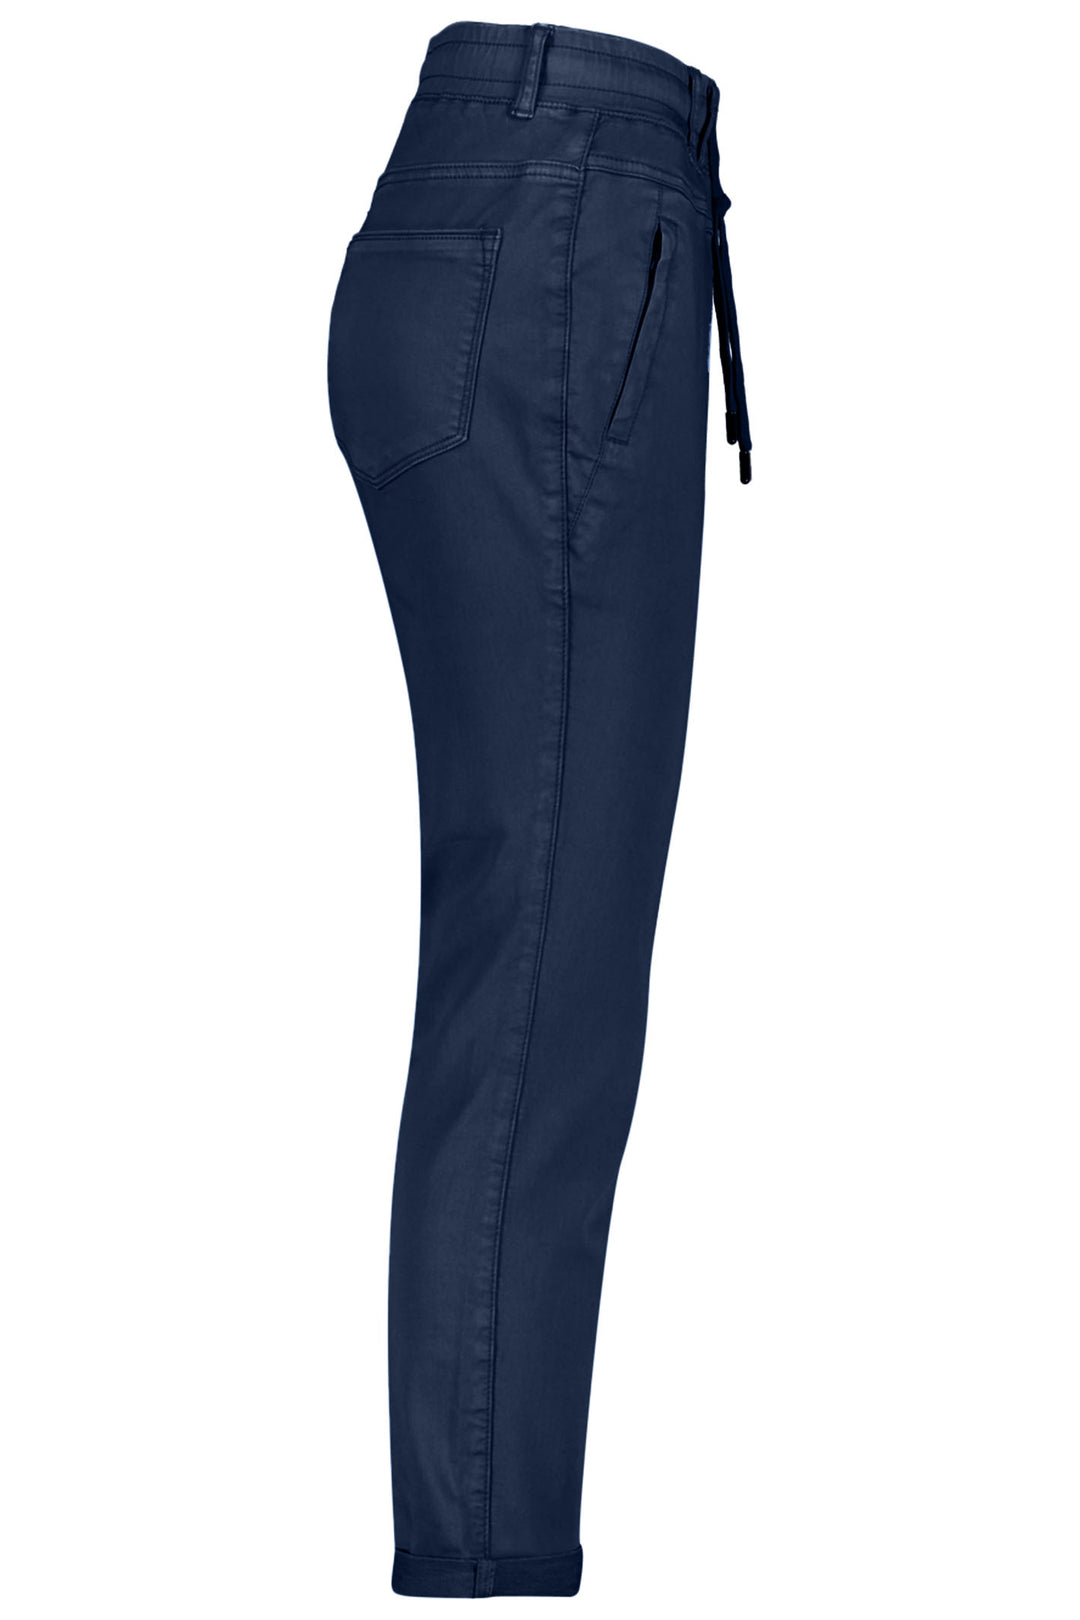 Red Button SRB4154 Navy Tessy Jogger Trousers 74cm - Olivia Grace Fashion